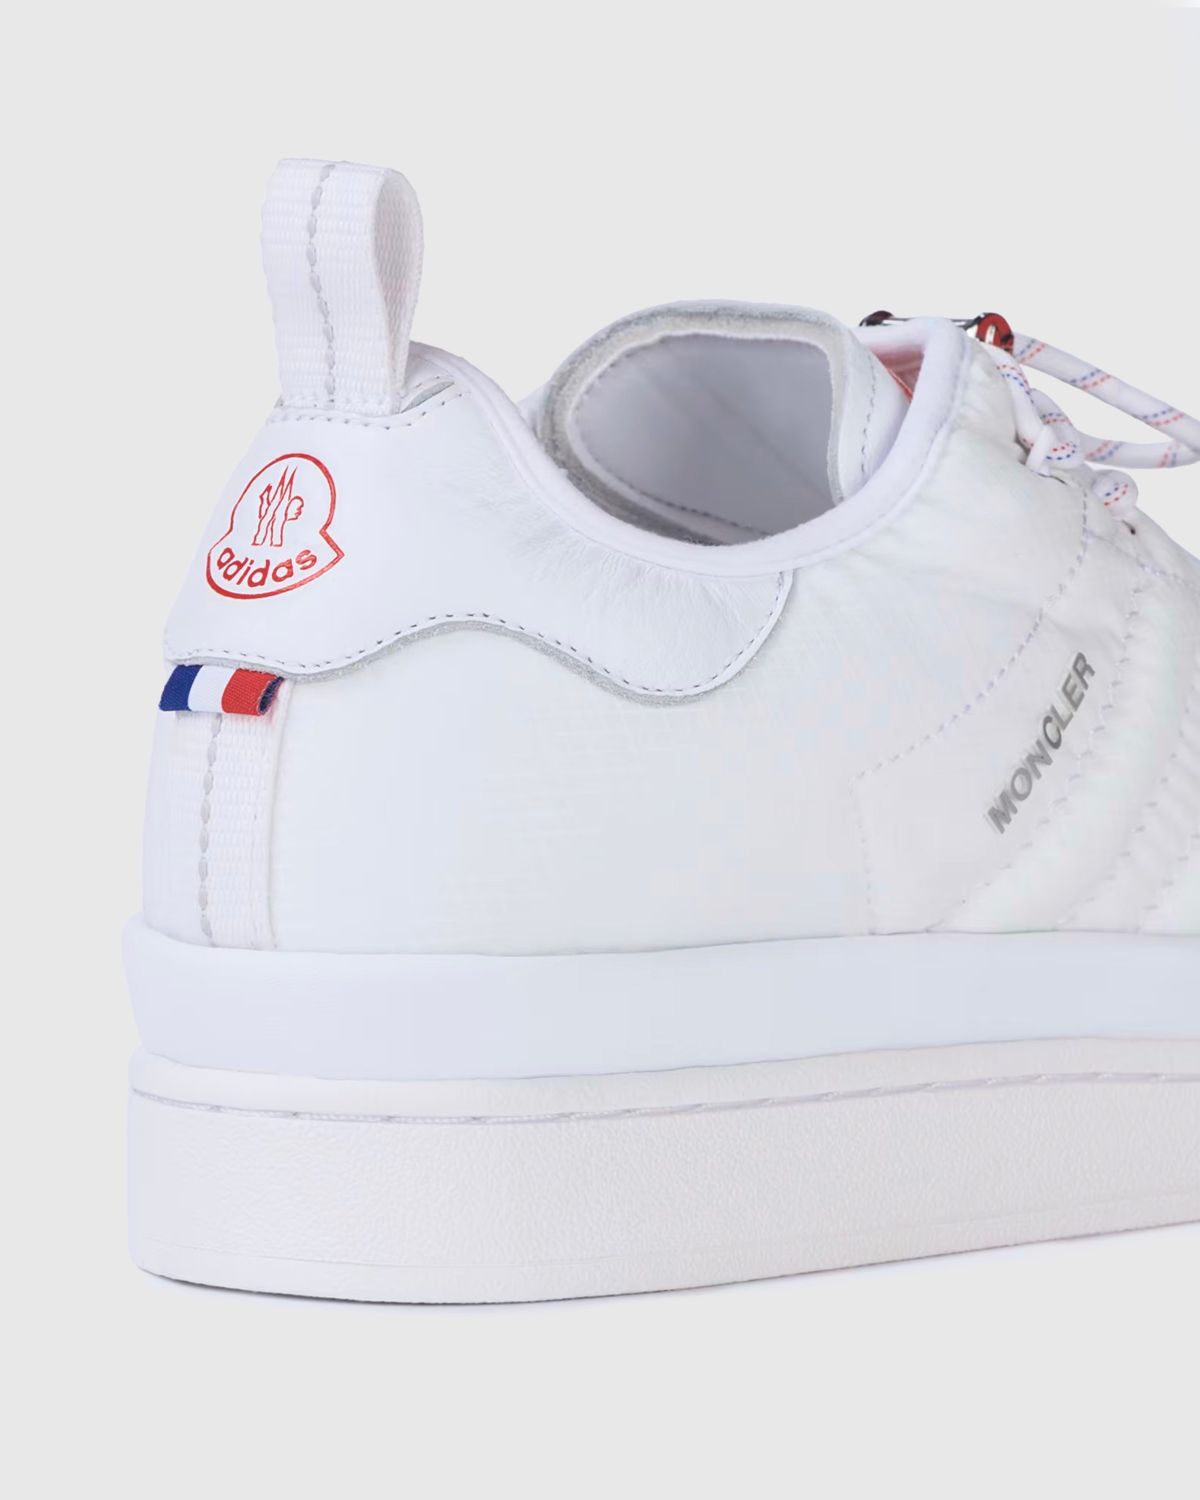 Moncler x adidas Originals – Campus Shoes Core White  - Sneakers - White - Image 4